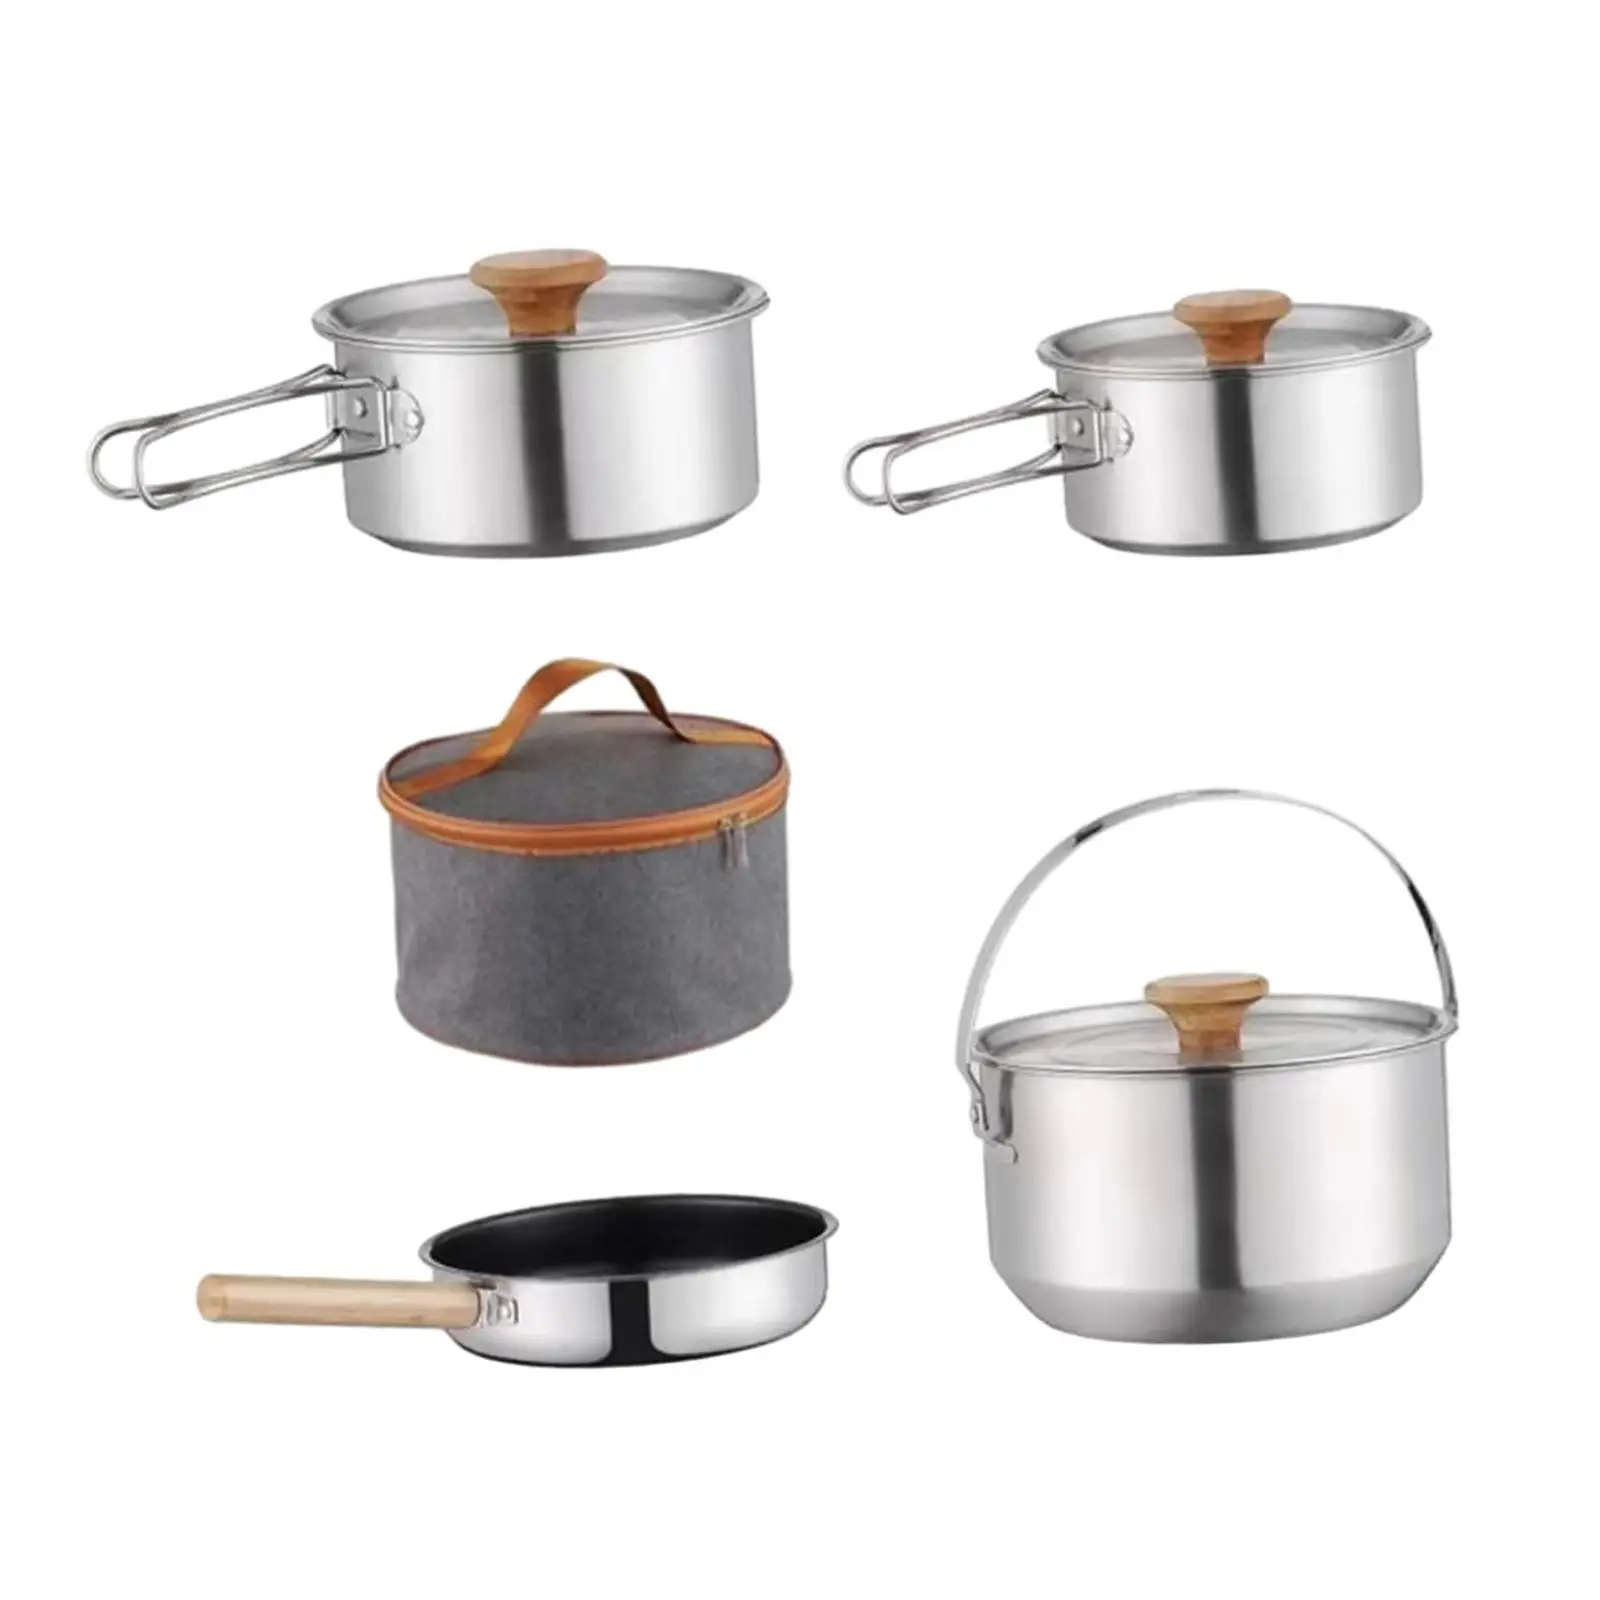 Camping Cookware Kit Cookset Hanging Pot Portable Outdoor Pot Cooking Set for Hiking Backpacking Campfire Survival Picnic